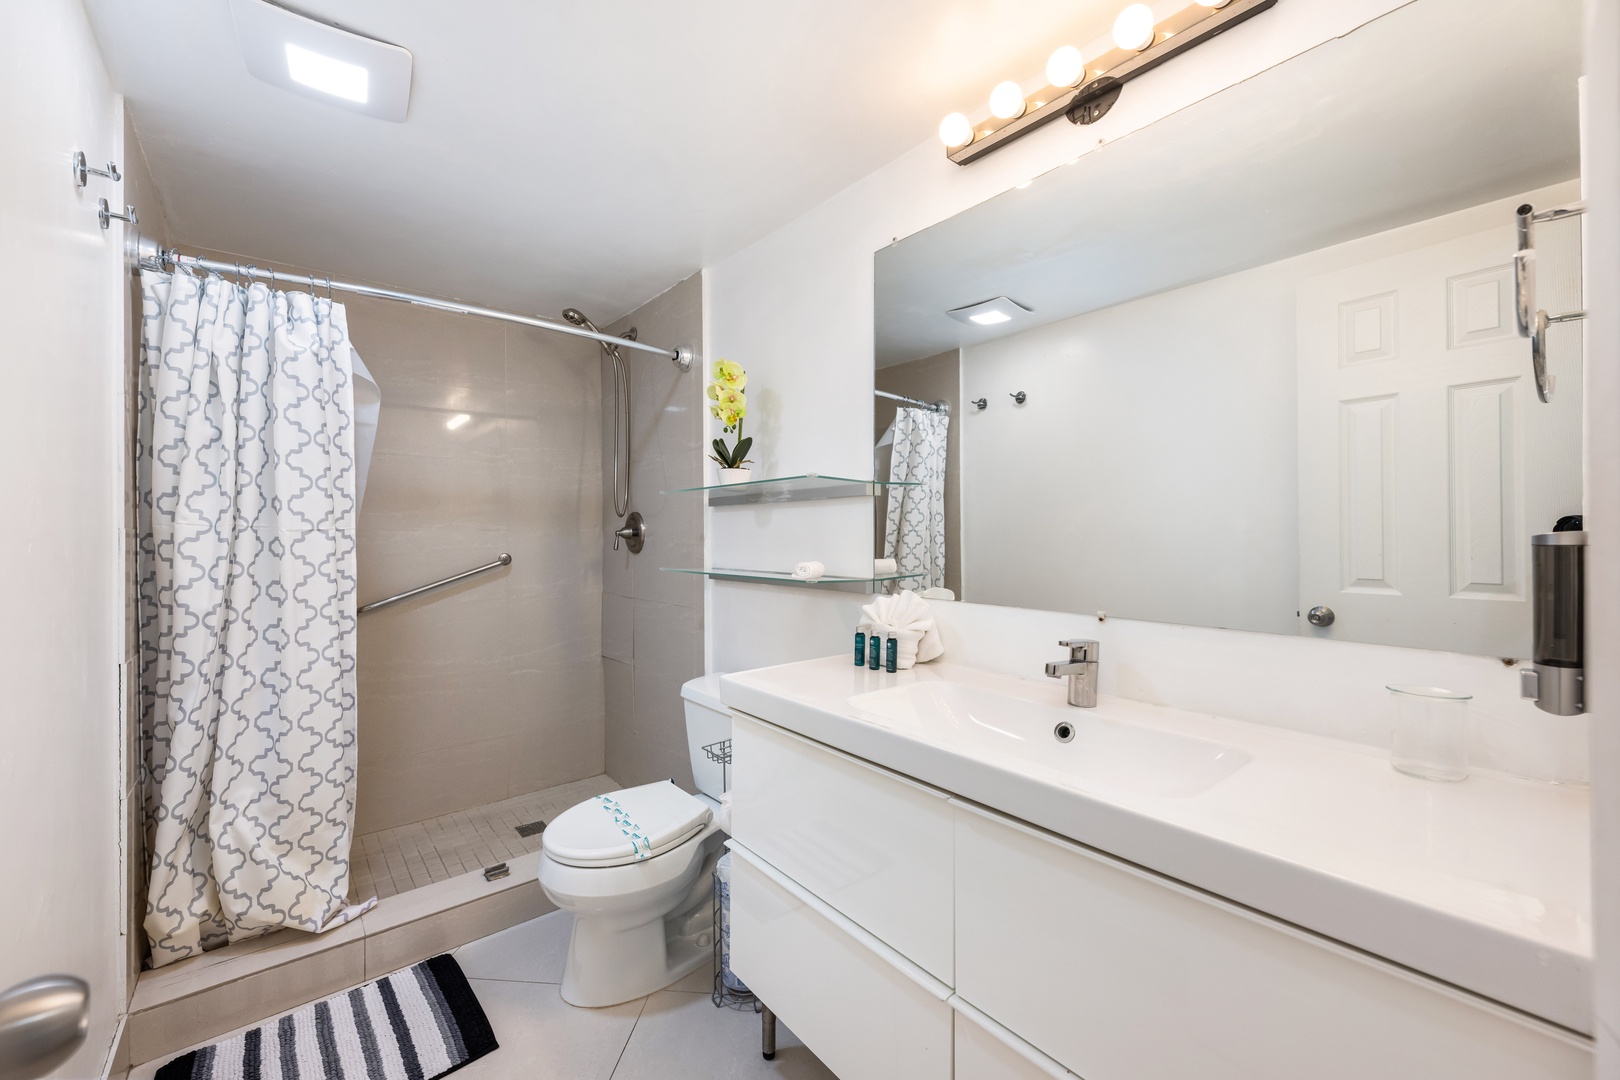 The second full bathroom features a large single vanity & walk-in shower